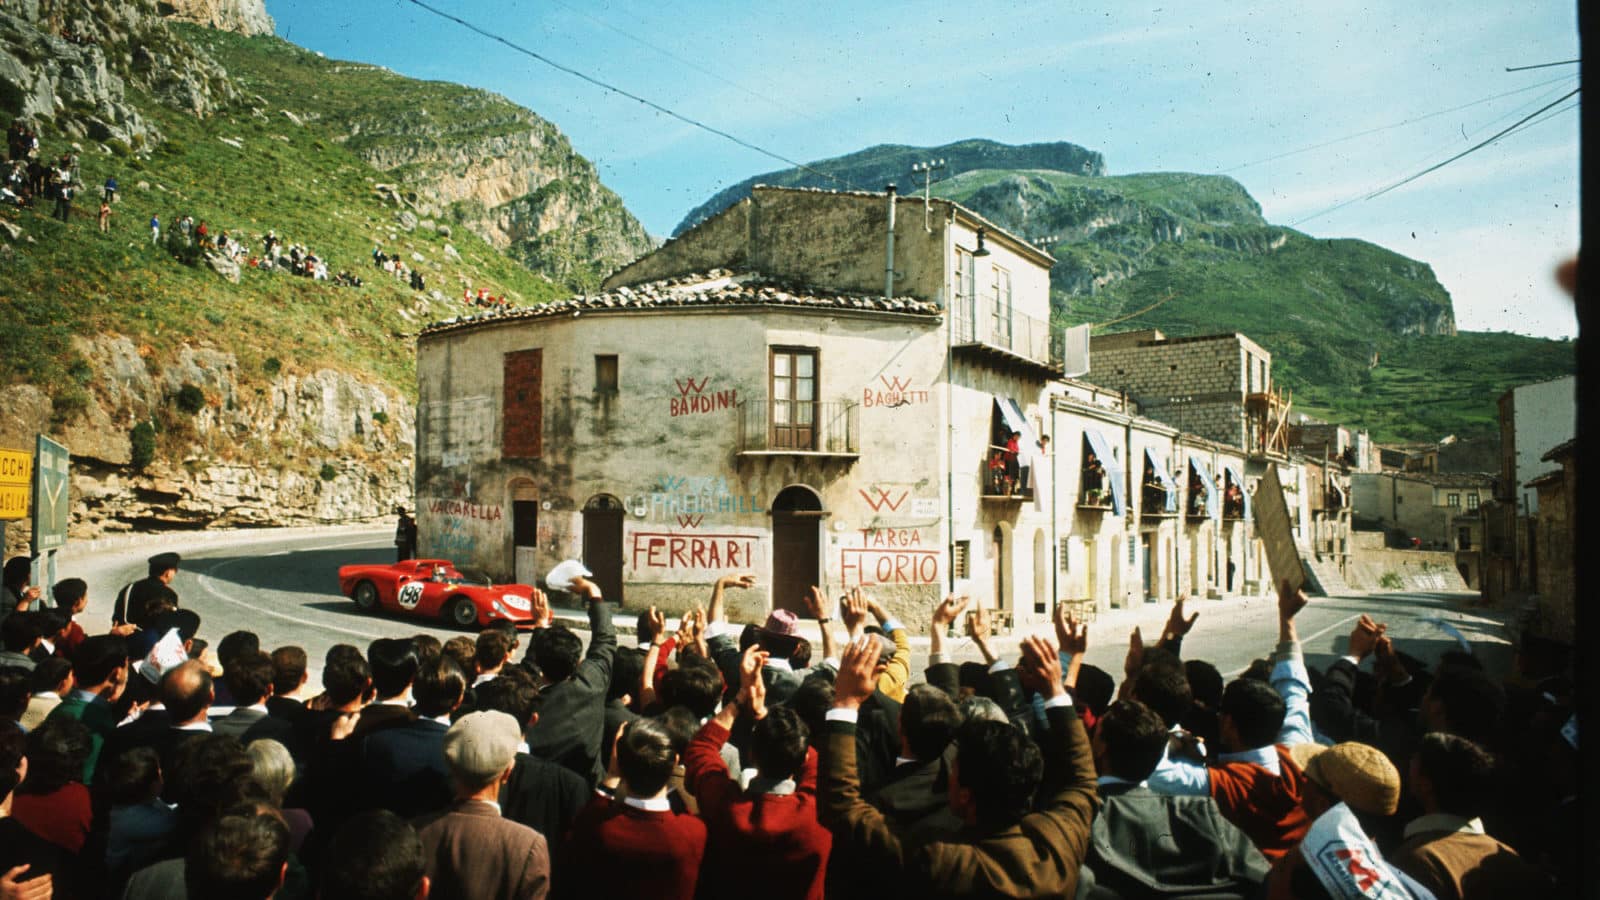 Crowds watch competitors in the 1965 Targa Florio as they race through the Sicilian village of Collesano. (Photo by David Lees/Corbis/VCG via Getty Images)